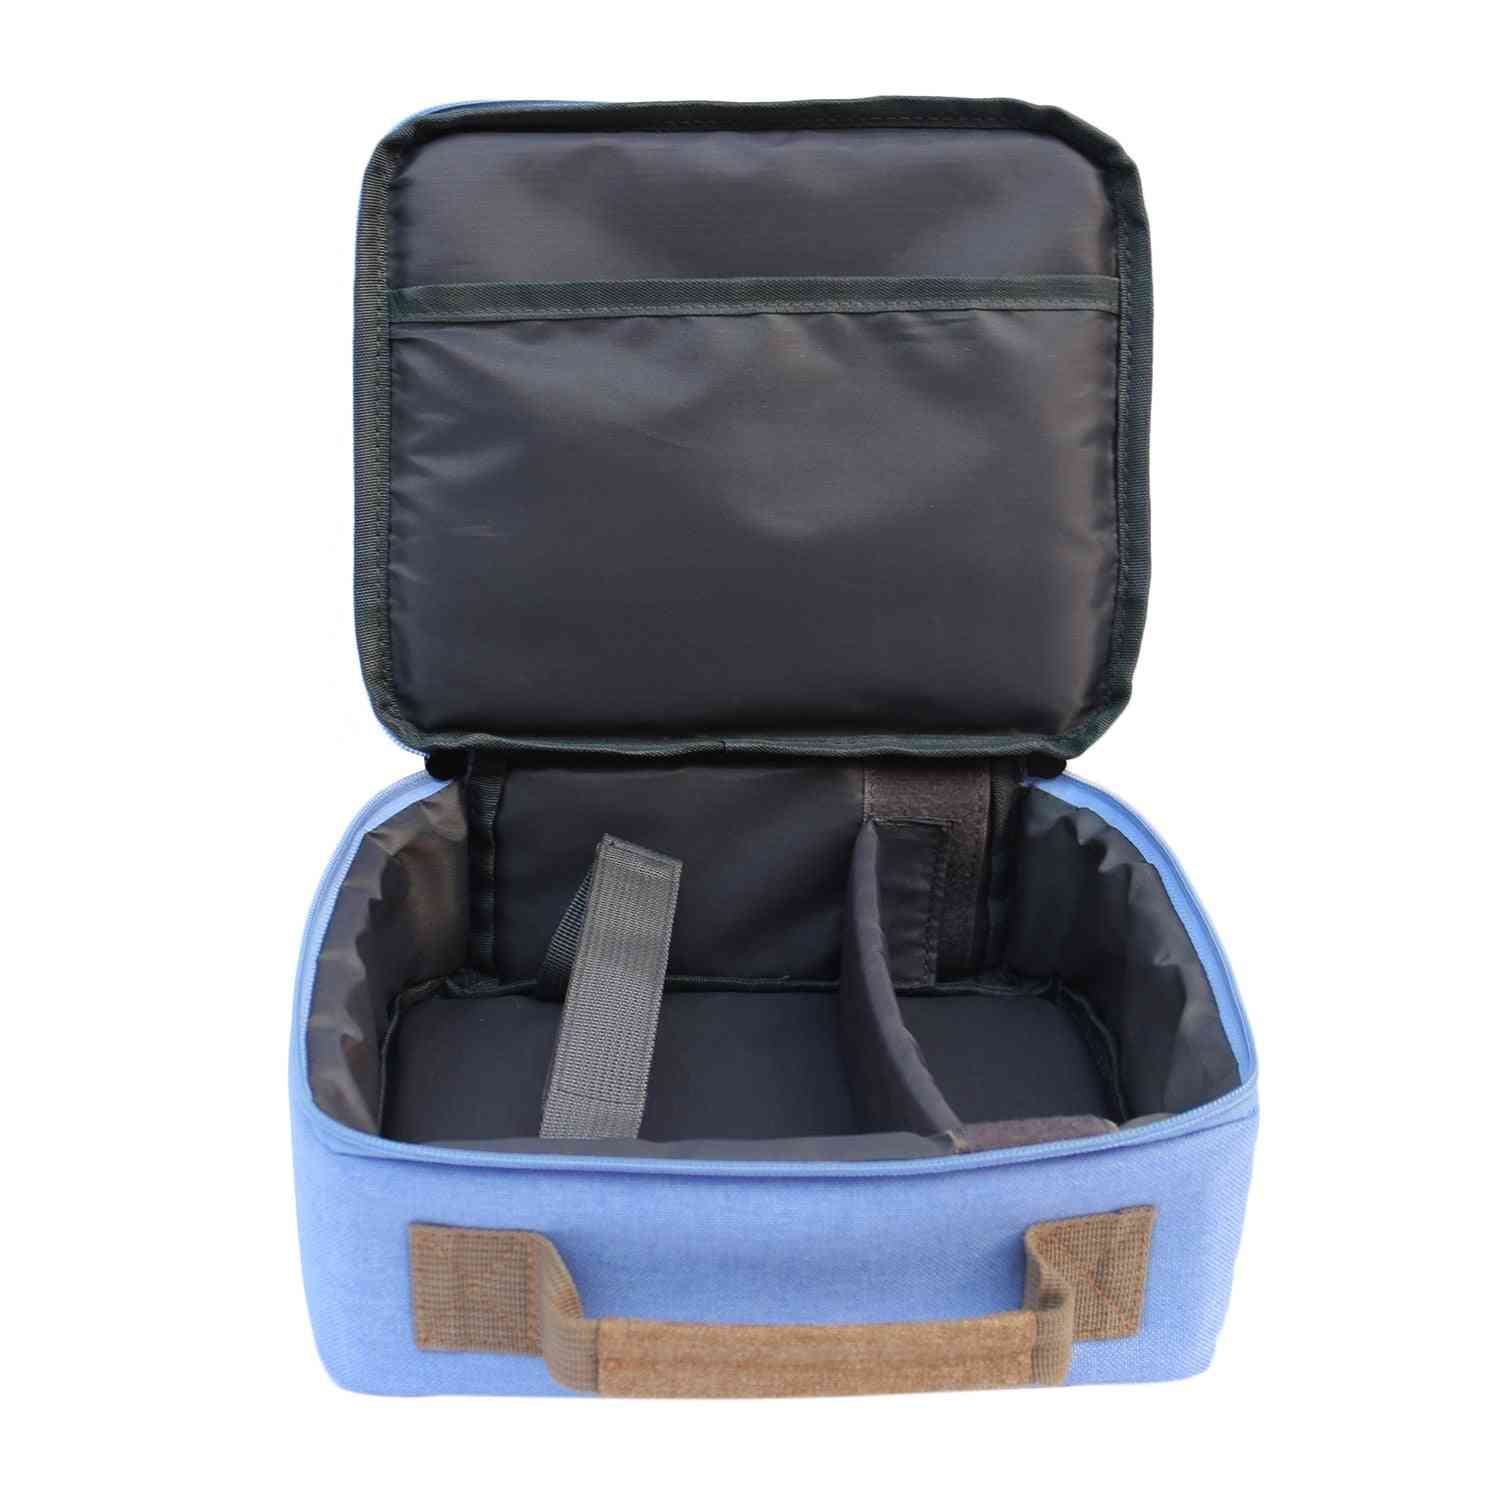 Portable Scratchproof, Shockproof Canvas Storage, Carry Bag, Handbag Case For Selphy Cp910 1200 Mini Printer Projectors